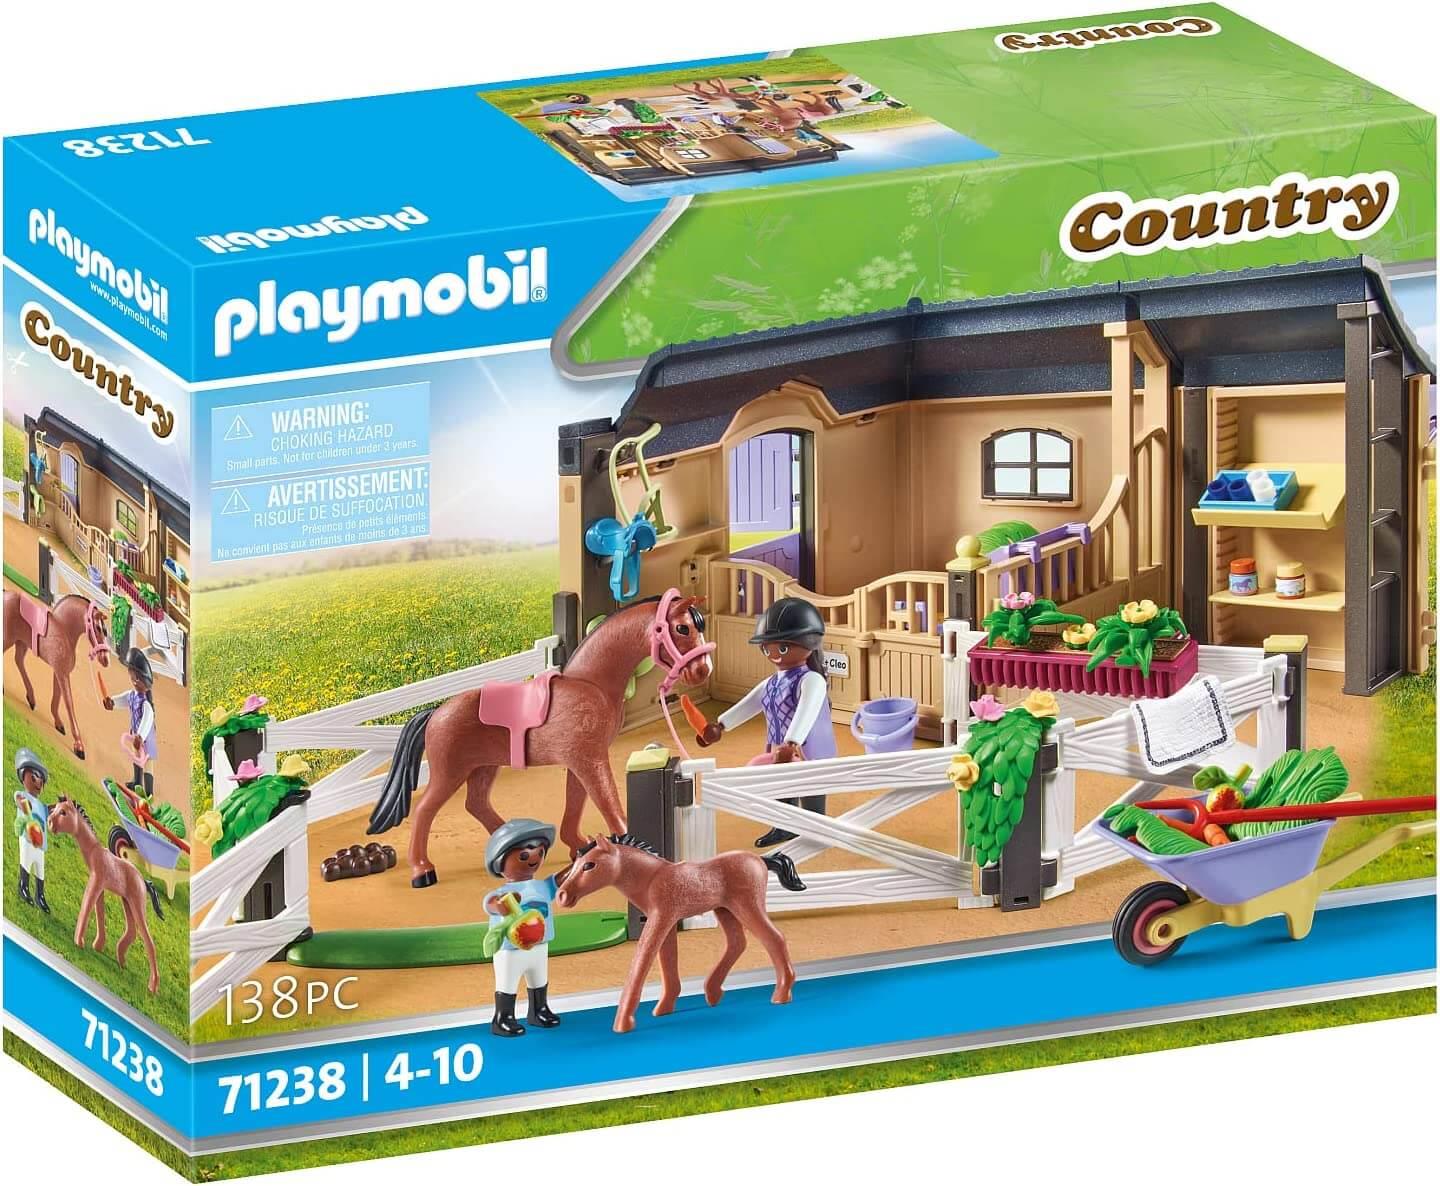 Playmobil Country 71238 Riding Stable